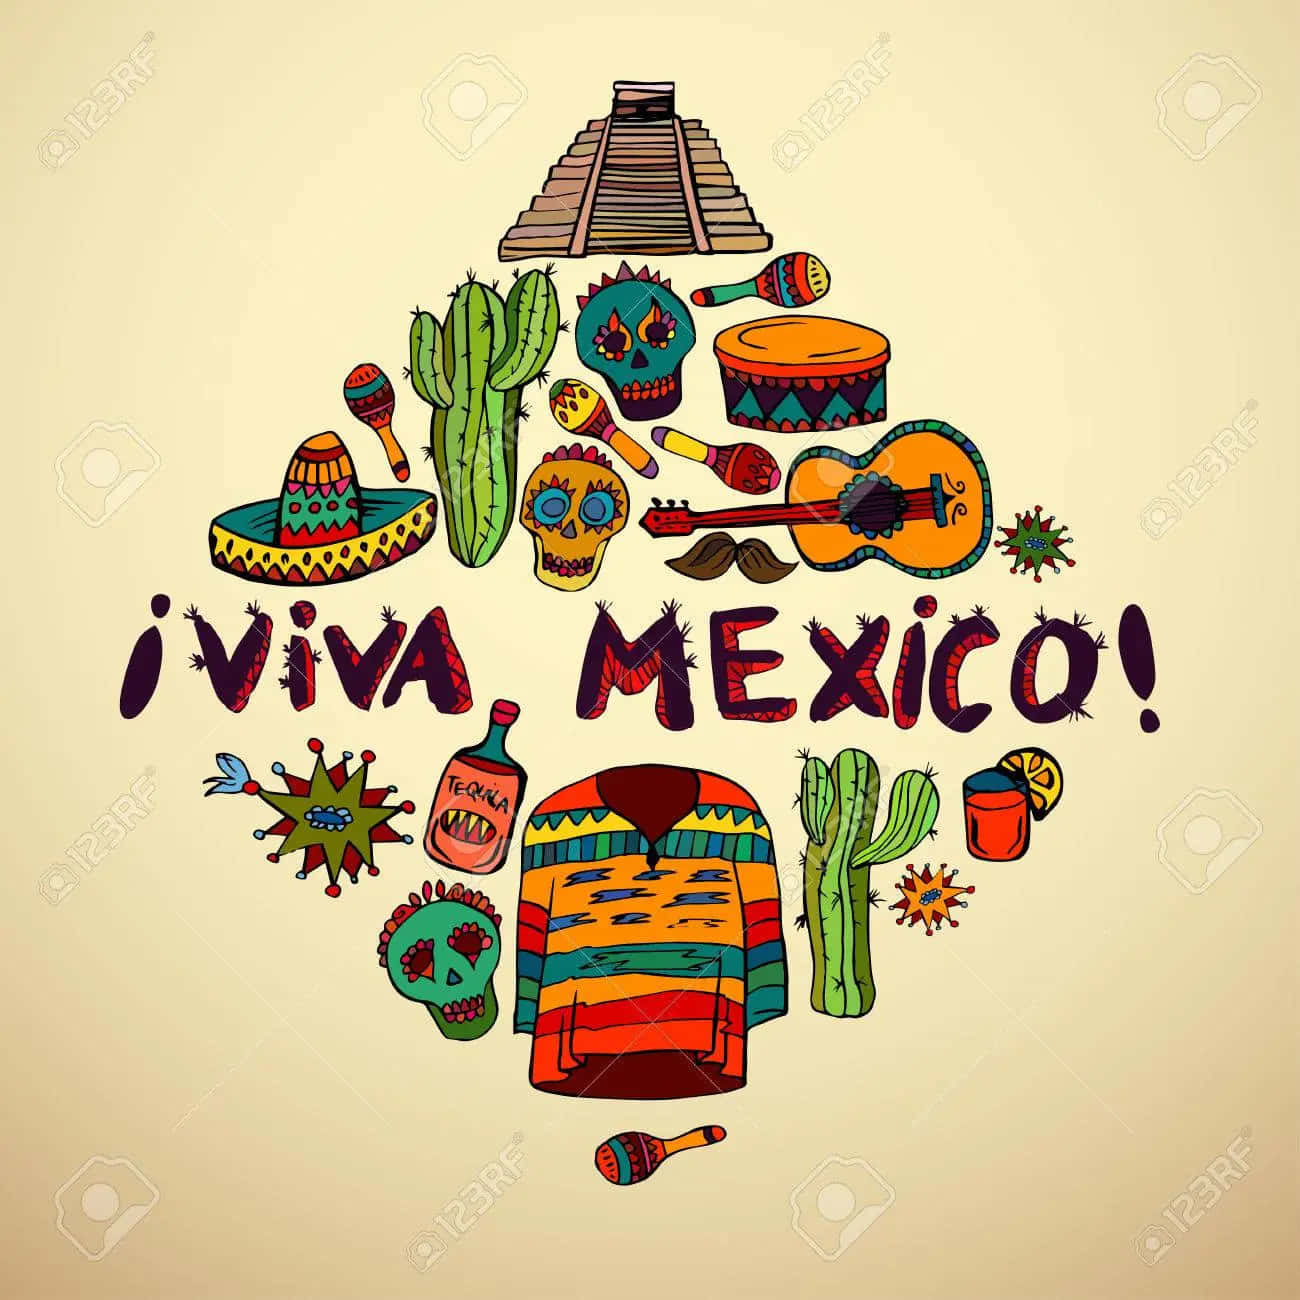 Viva Mexico! Celebrate the culture, heritage and spirit of this beautiful nation. Wallpaper